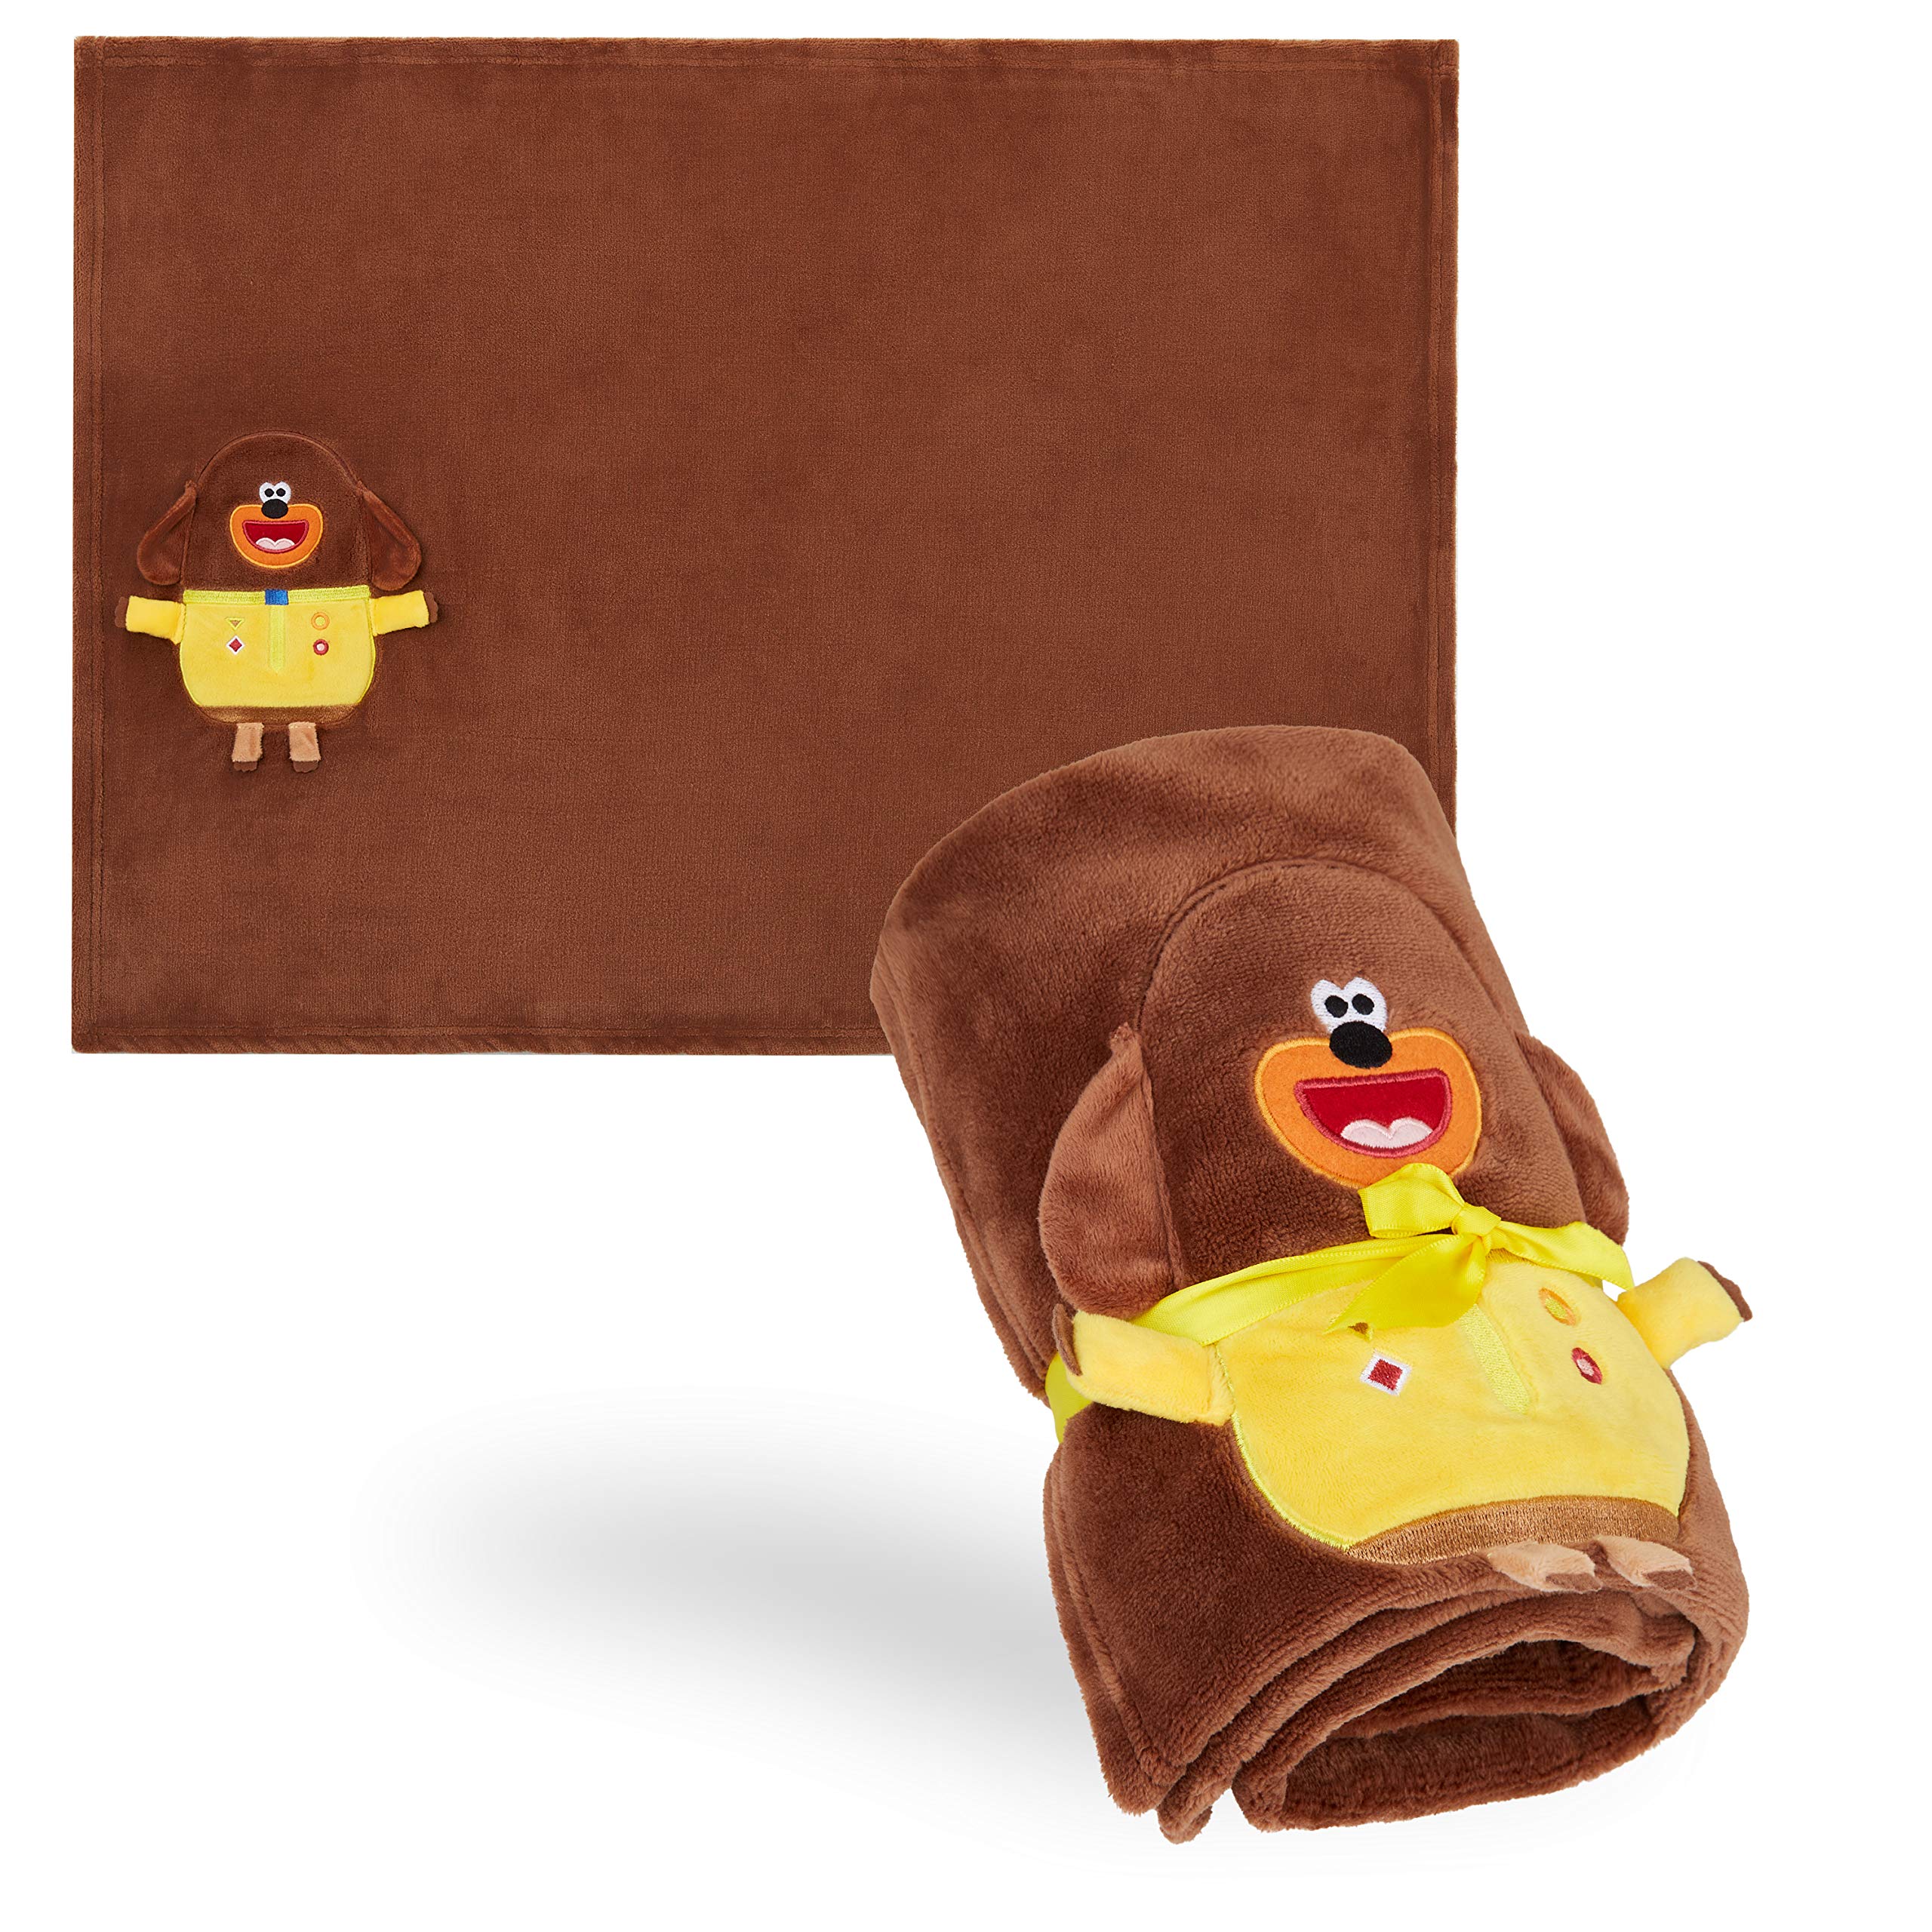 Hey Duggee Fleece Blankets for Kids, Super Soft Throw Blanket, Bedroom Accessories for Children, Warm Fluffy Blankets, for Girls Boys Toddlers